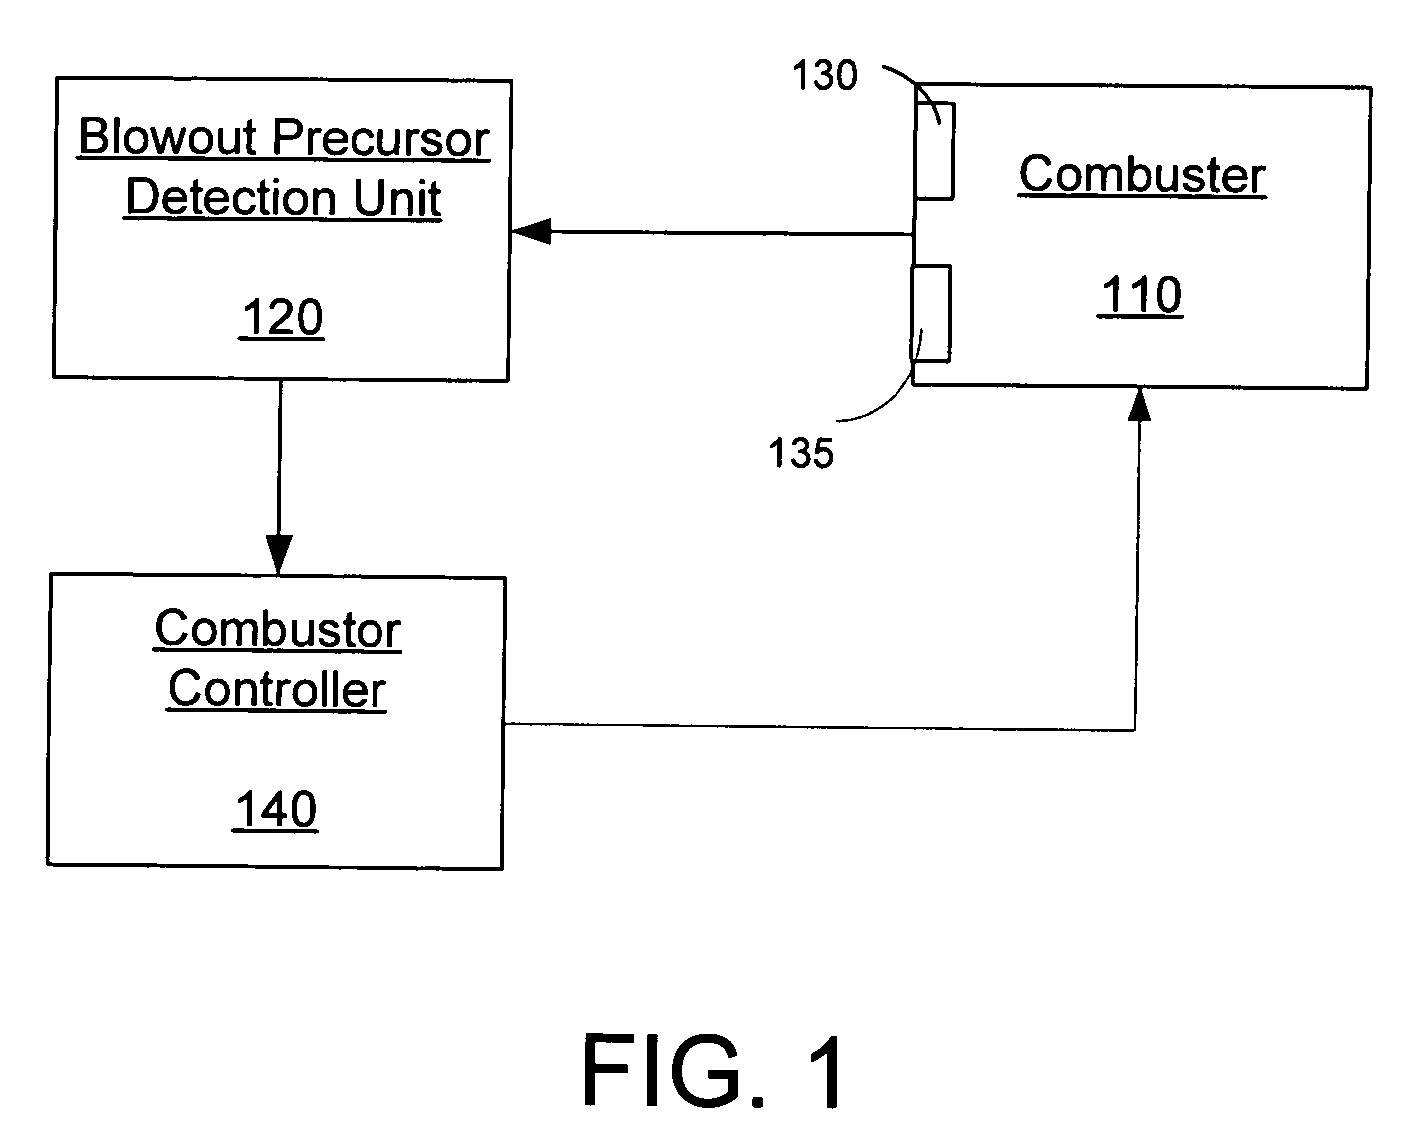 Systems and methods for detection and control of blowout precursors in combustors using acoustical and optical sensing